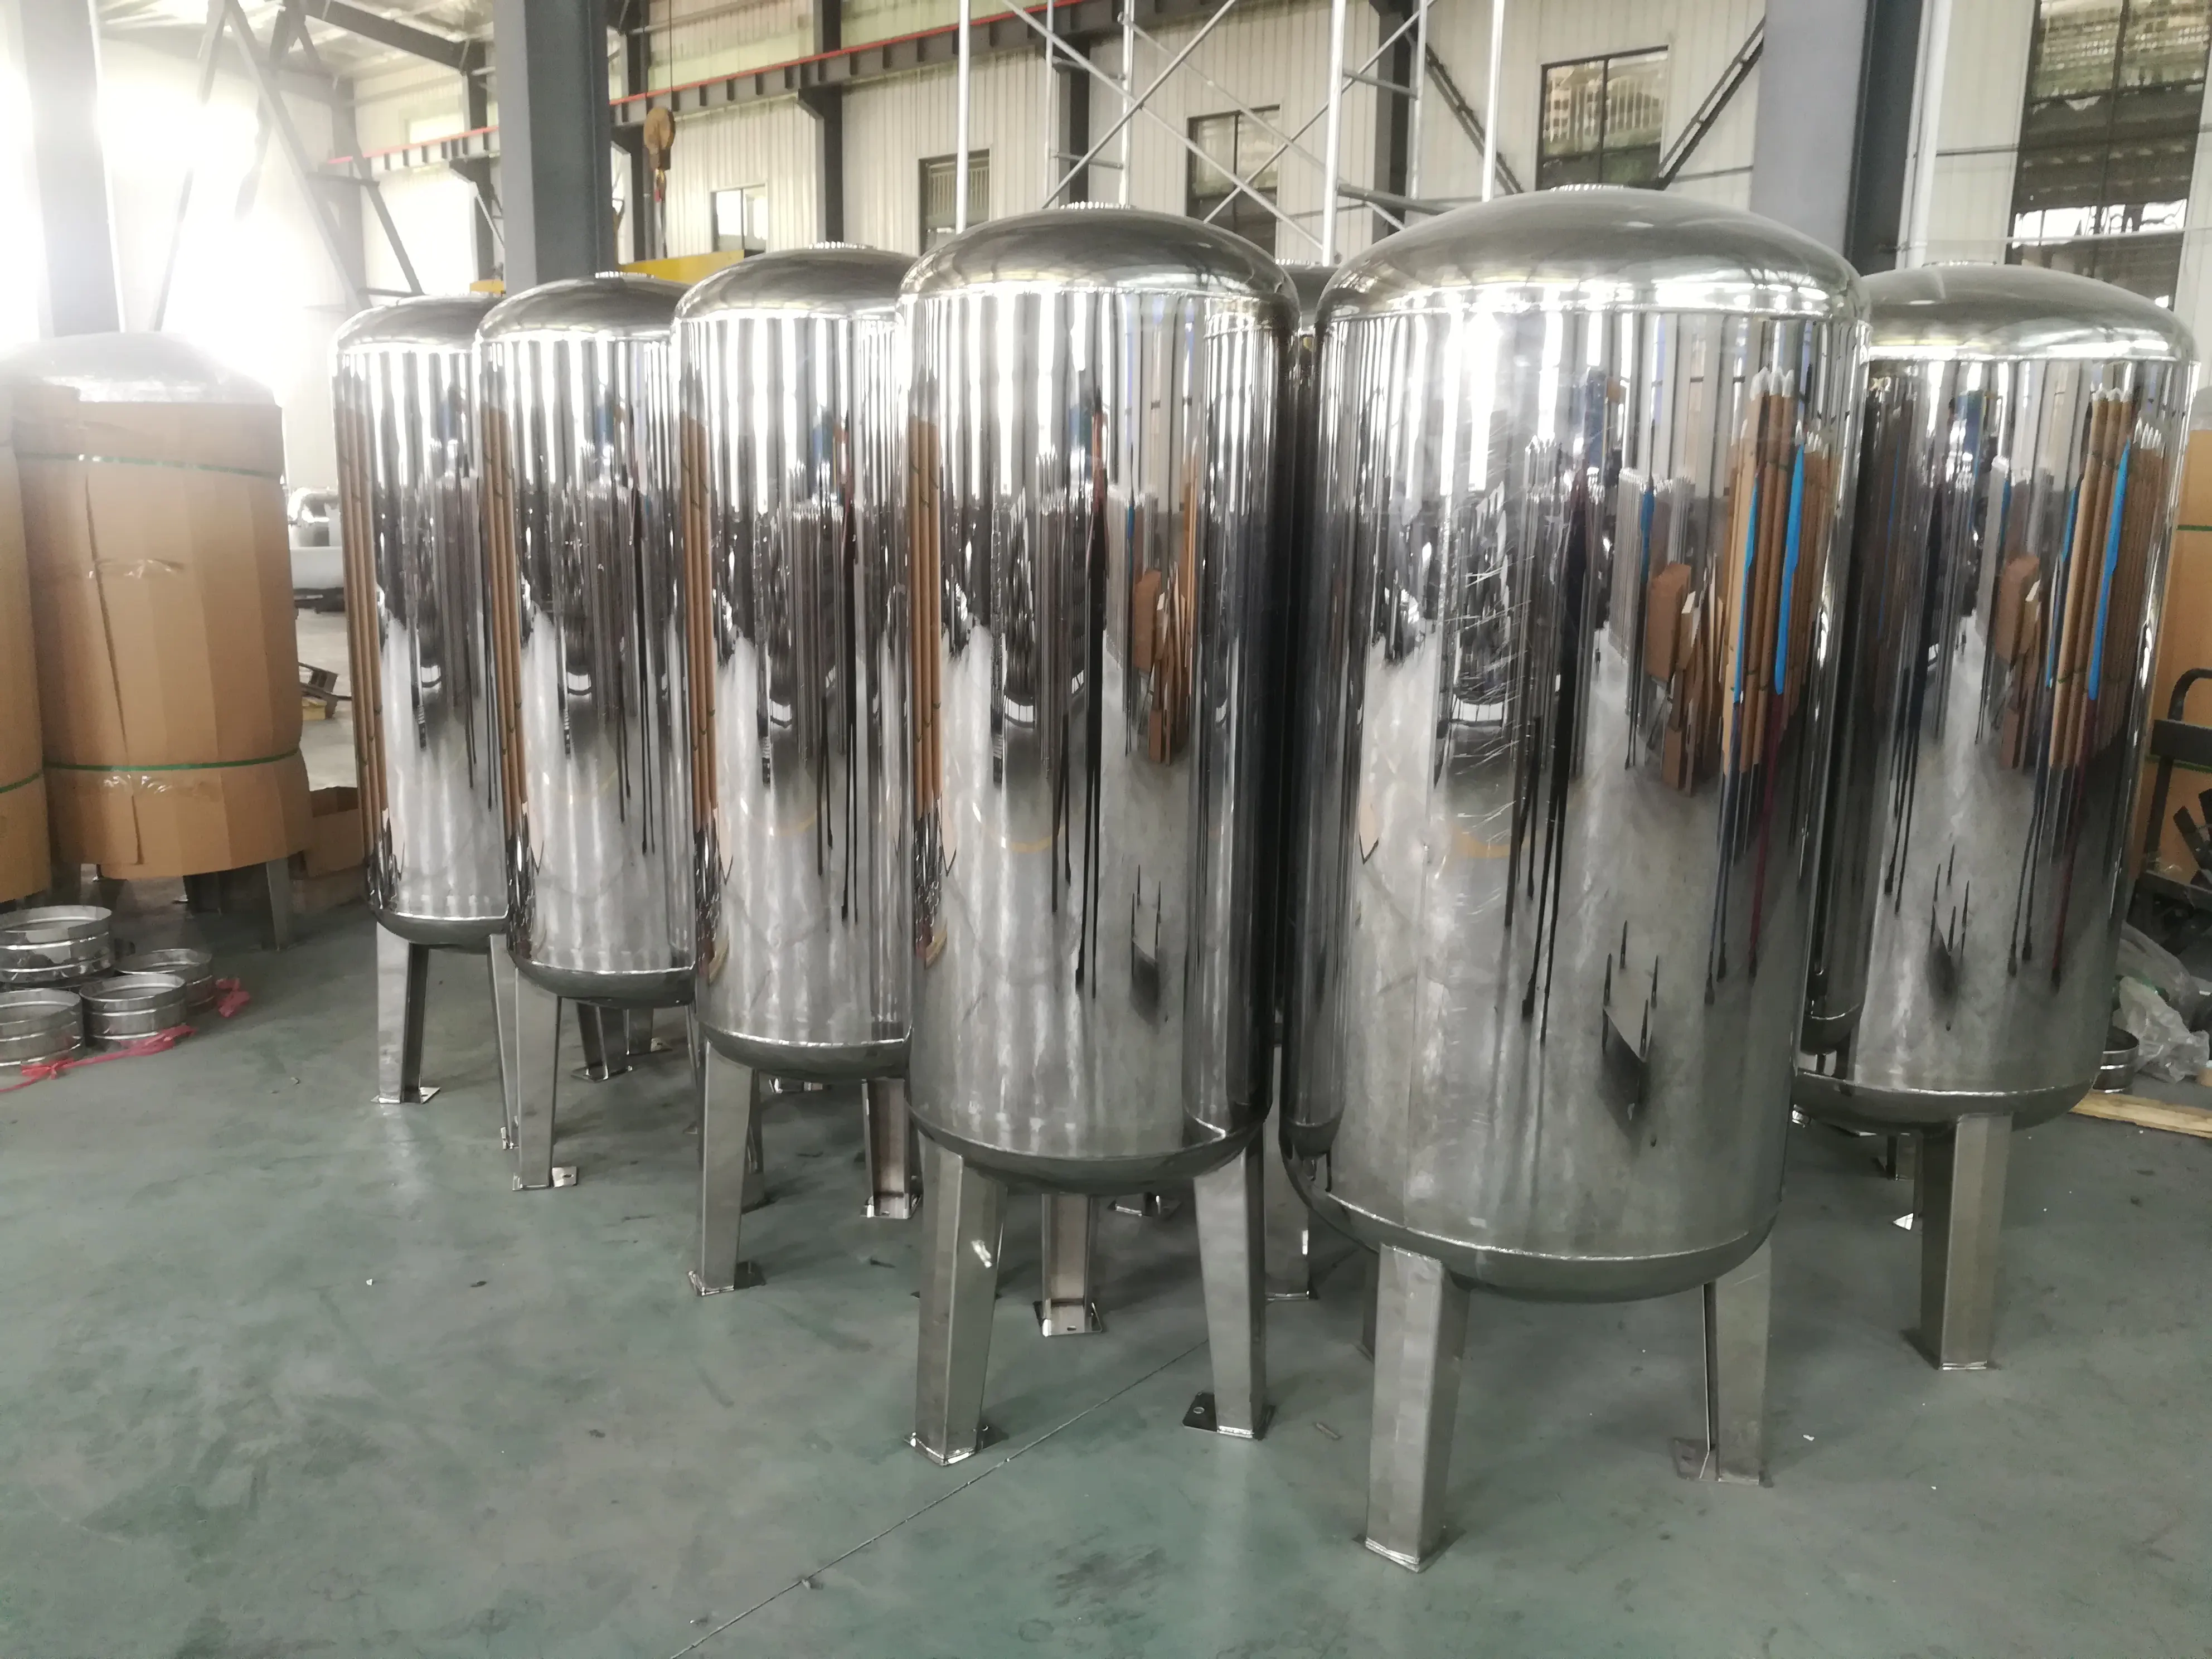 hot sale SS Water Filter Tanks 1035 1354 stainless steel Water Filter Pressure Tank different size